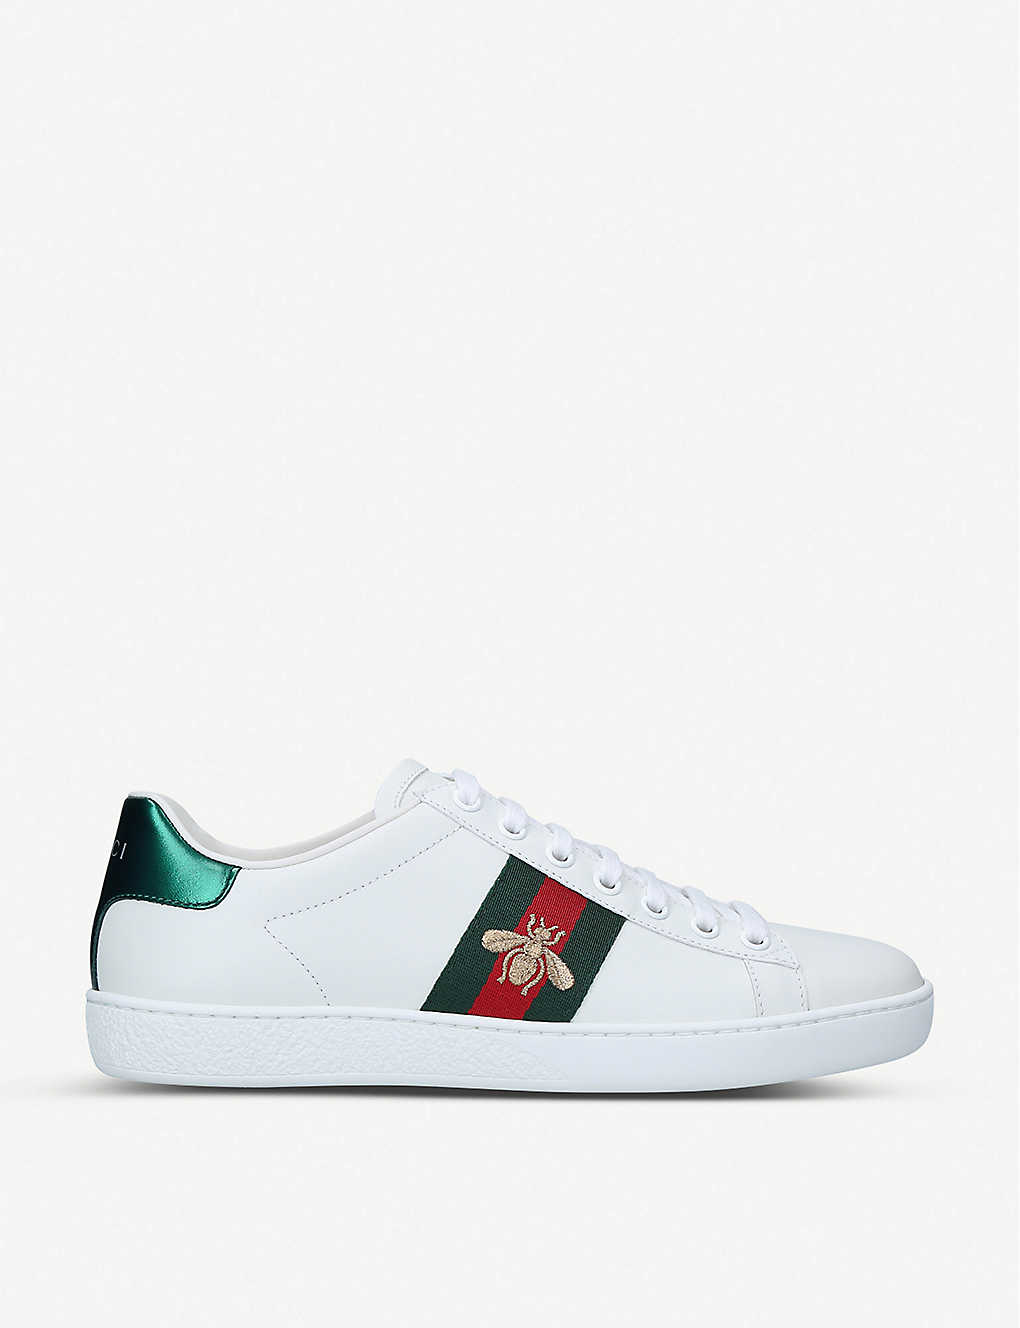 GUCCI: New Ace interlocking-G leather trainers